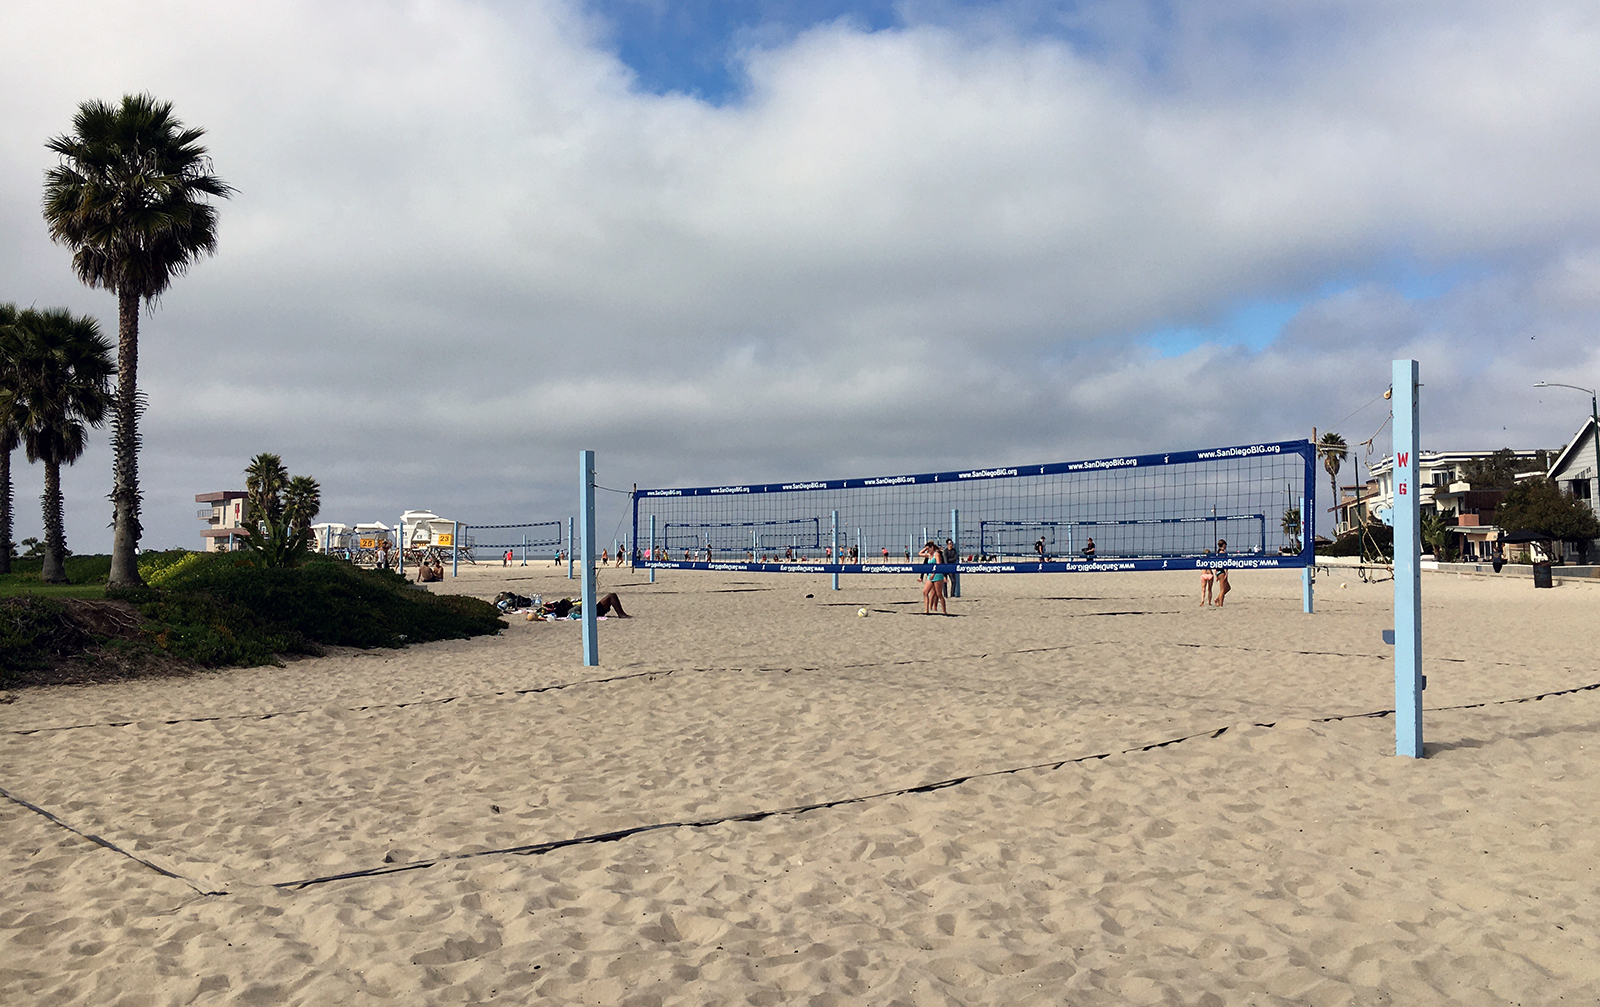 https://missionbeachlife.com/wp-content/uploads/2015/12/south-mission-beach-vollyeball-courts.jpg